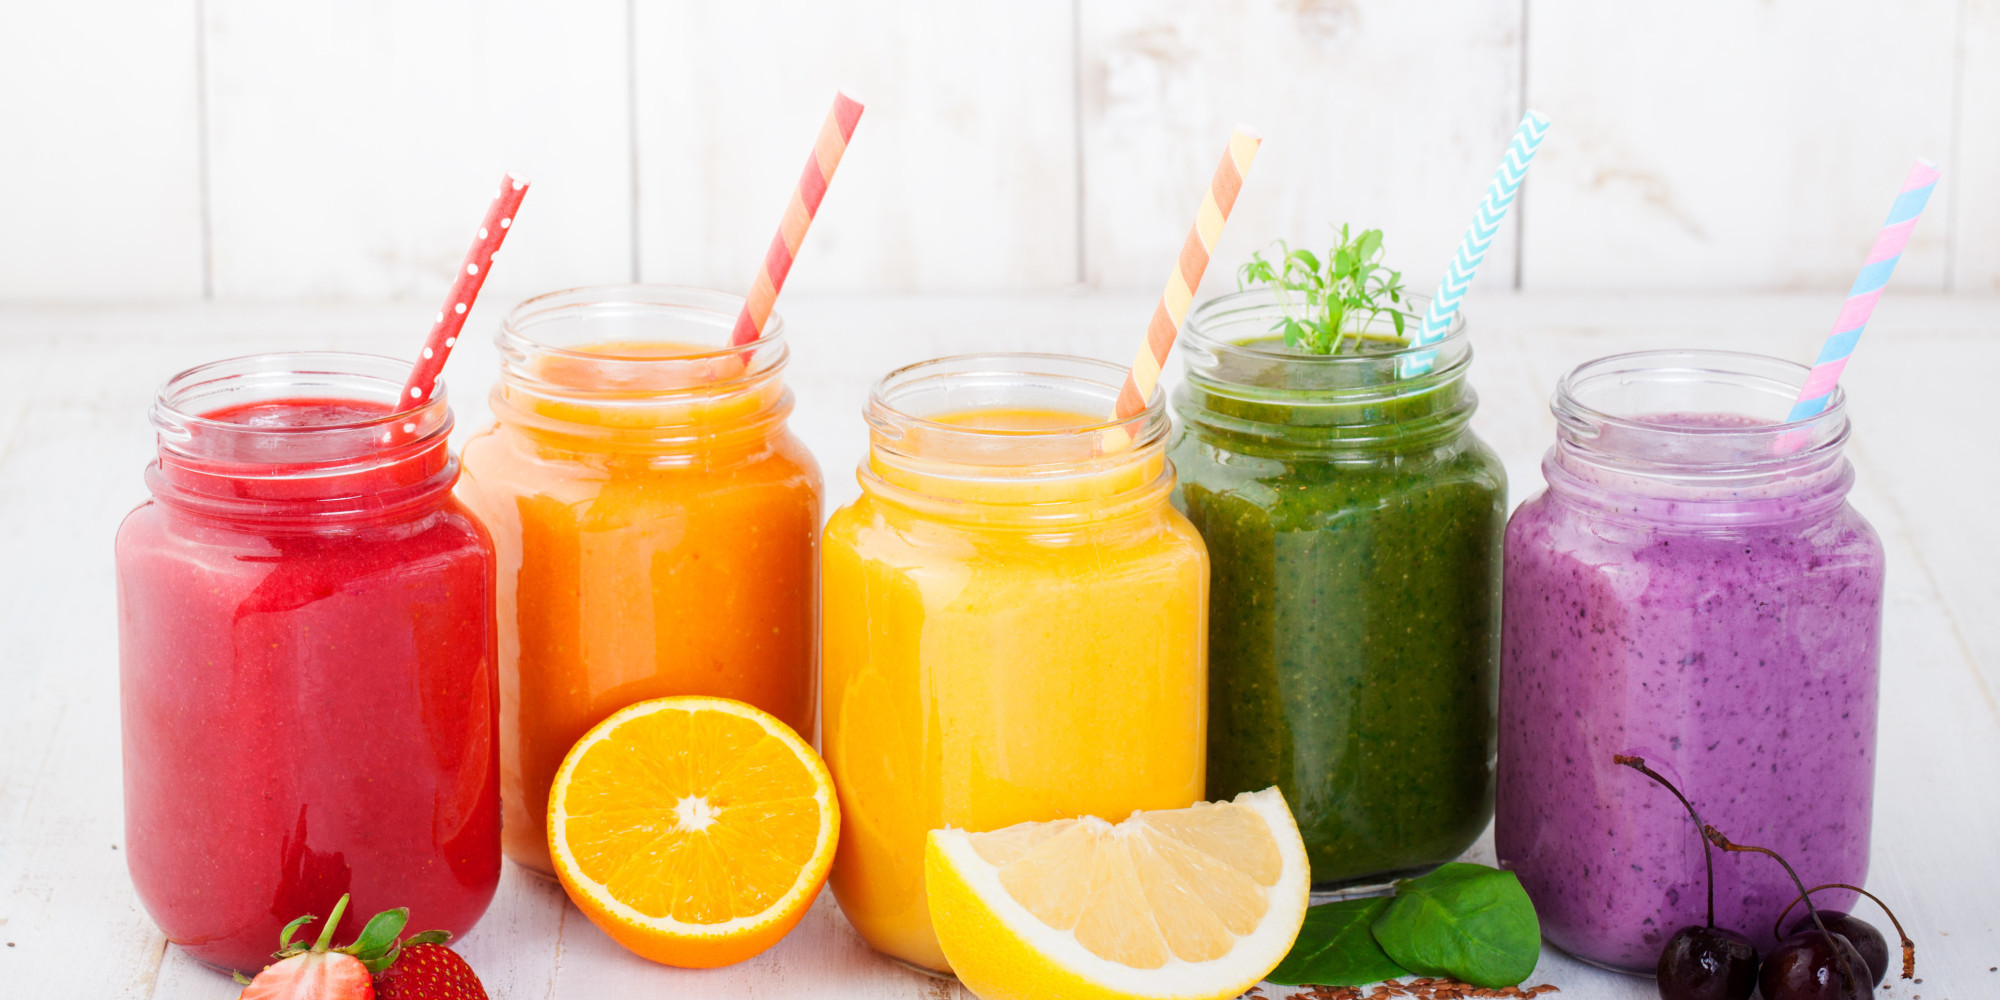 Healthy Juice Smoothies
 8 "Healthy" Summer Foods And Drinks That Are Actually